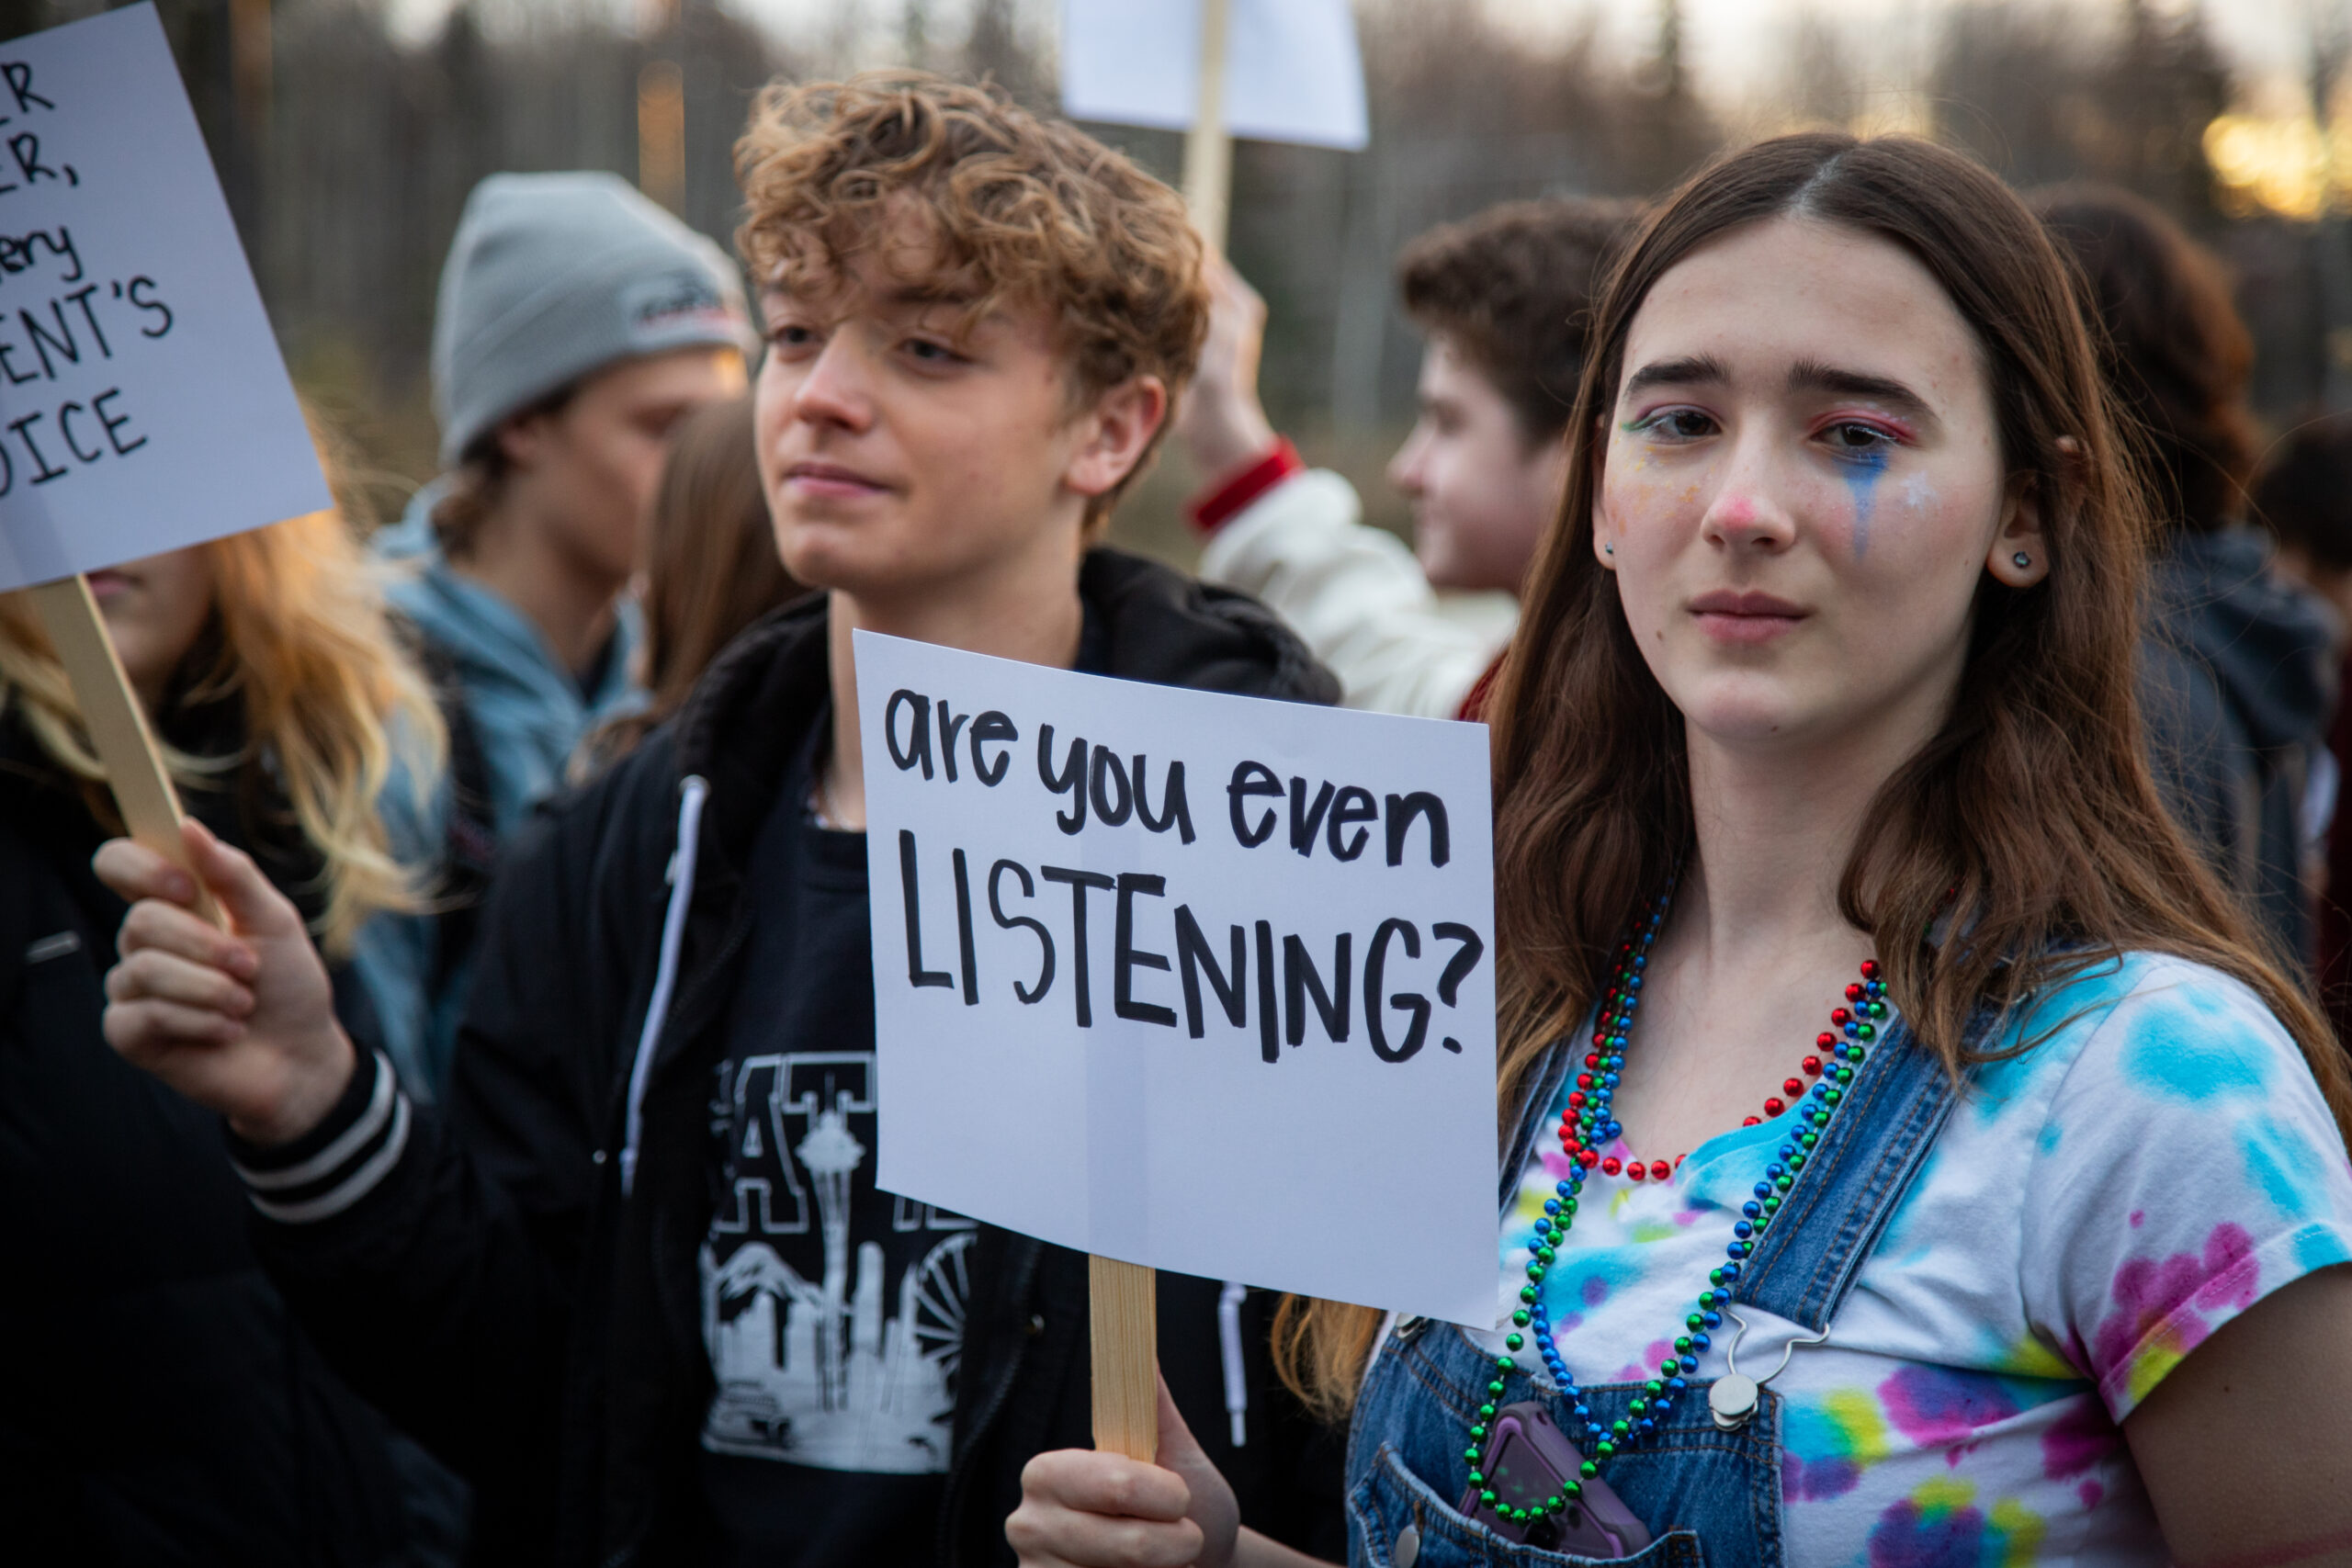 A student wearing colorful makeup holds a sign that says "Are you even listening?" during a walkout protest at Career Tech High School.